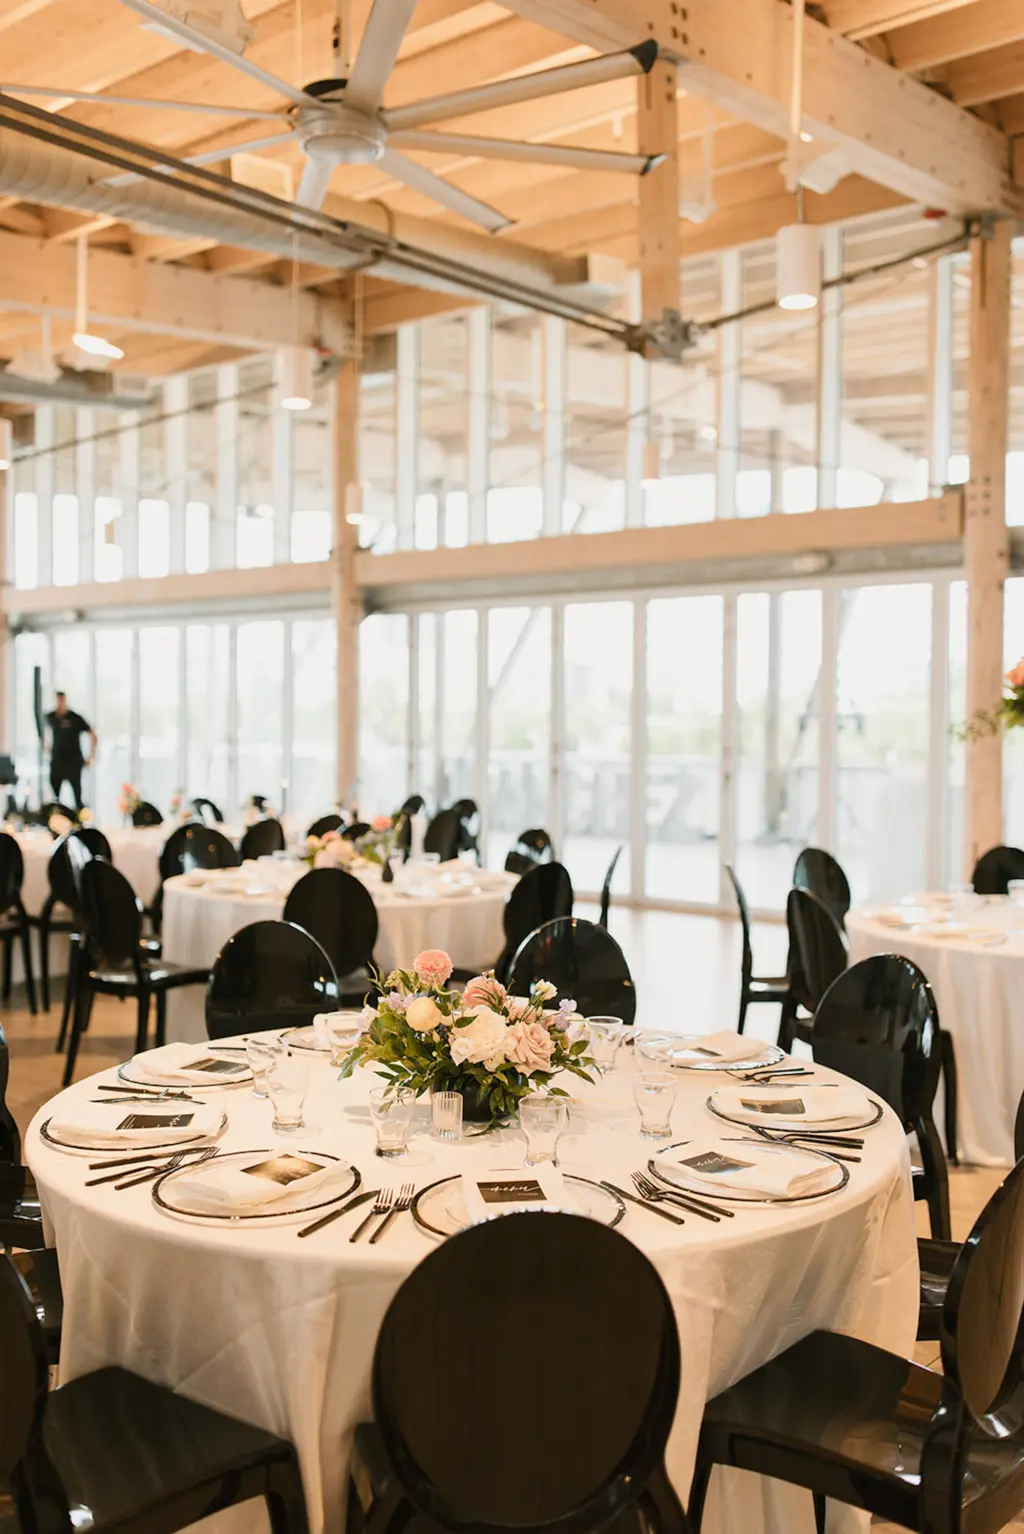 Modern Black and White Spring Wedding Reception Inspiration | Black Acrylic Chairs and Round Tables from Florida Event Rentals A Chair Affair | Tampa Bay Planner Coastal Coordinating | Downtown Heights Event Venue Tampa River Center